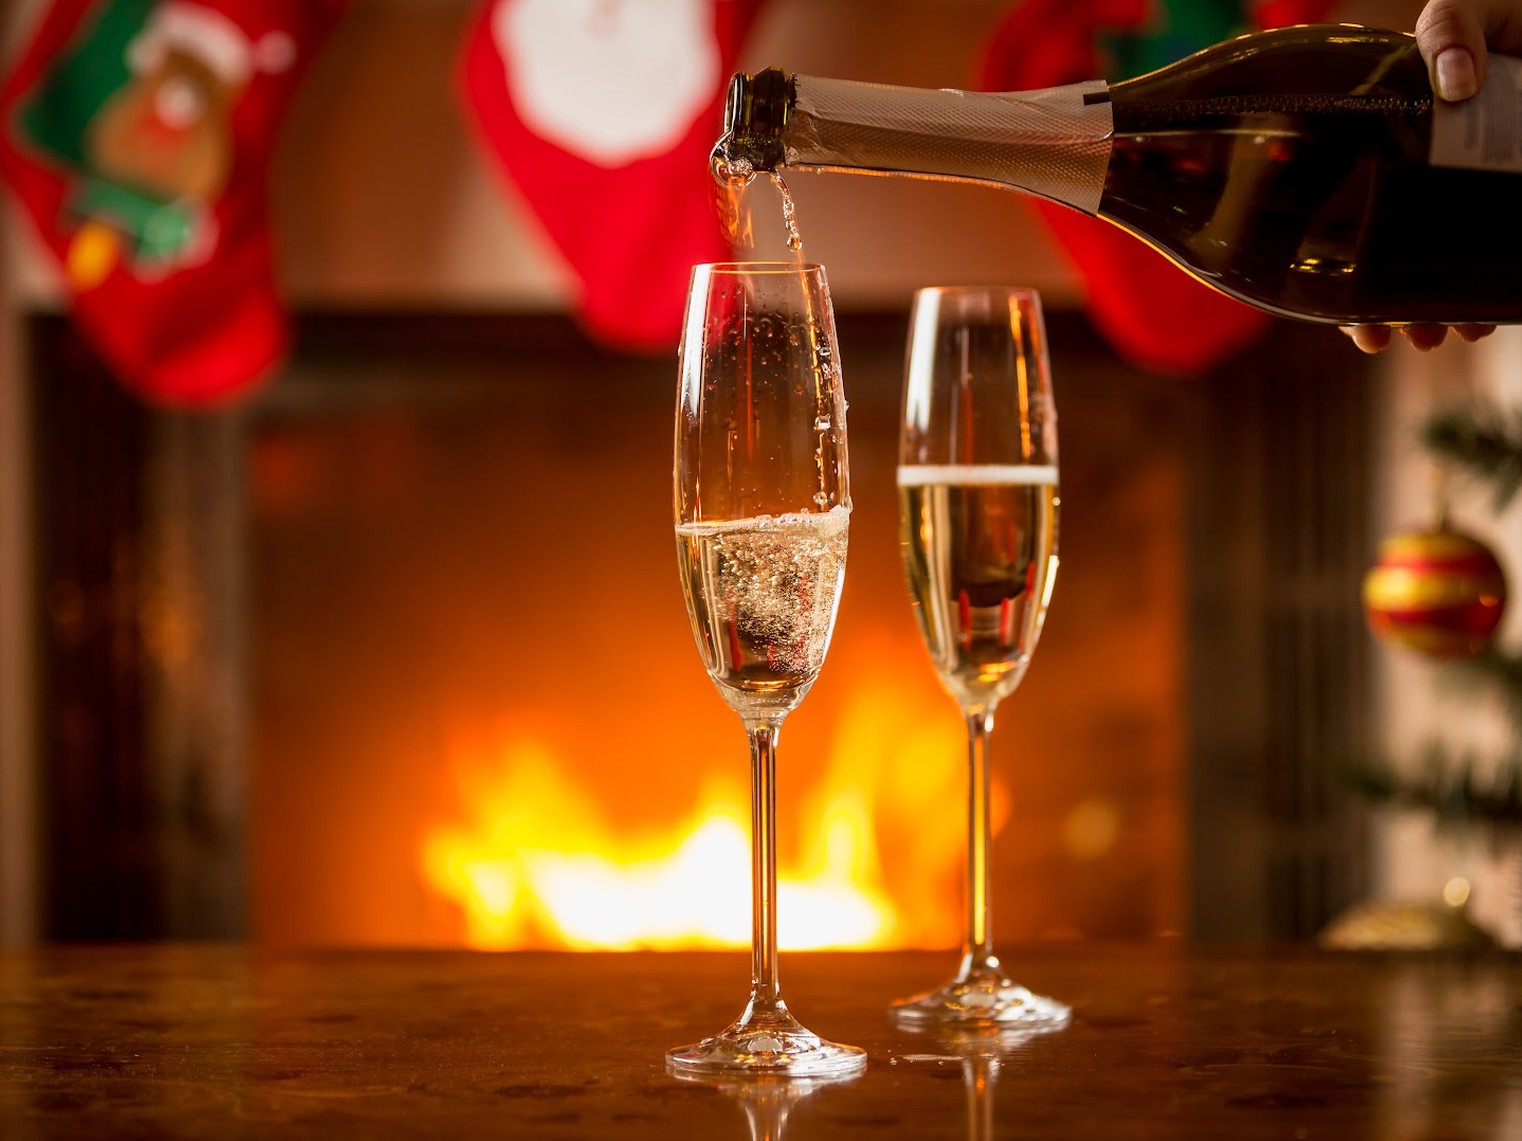 The Best Chalets for Celebrating Christmas & New Year's in Style